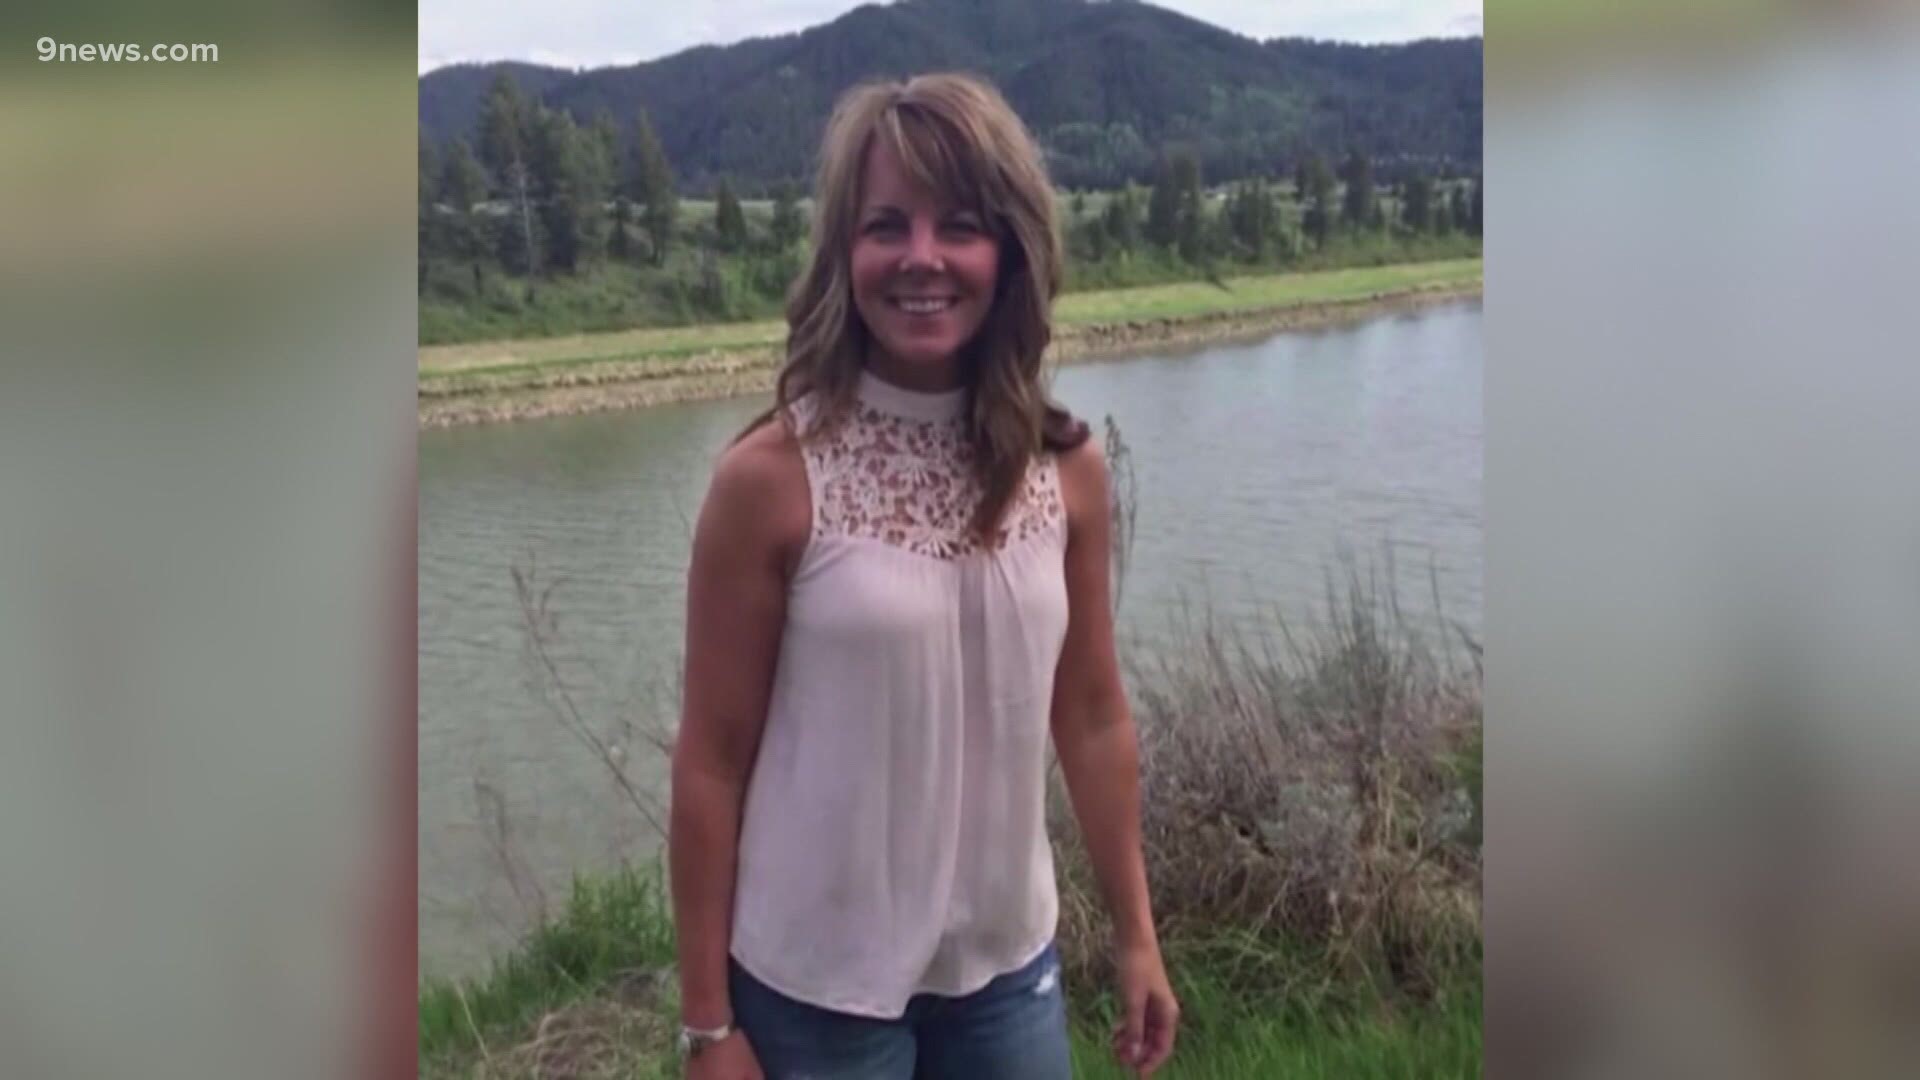 The brother of missing 49-year-old Suzanne Morphew is organizing a massive search effort to find her.